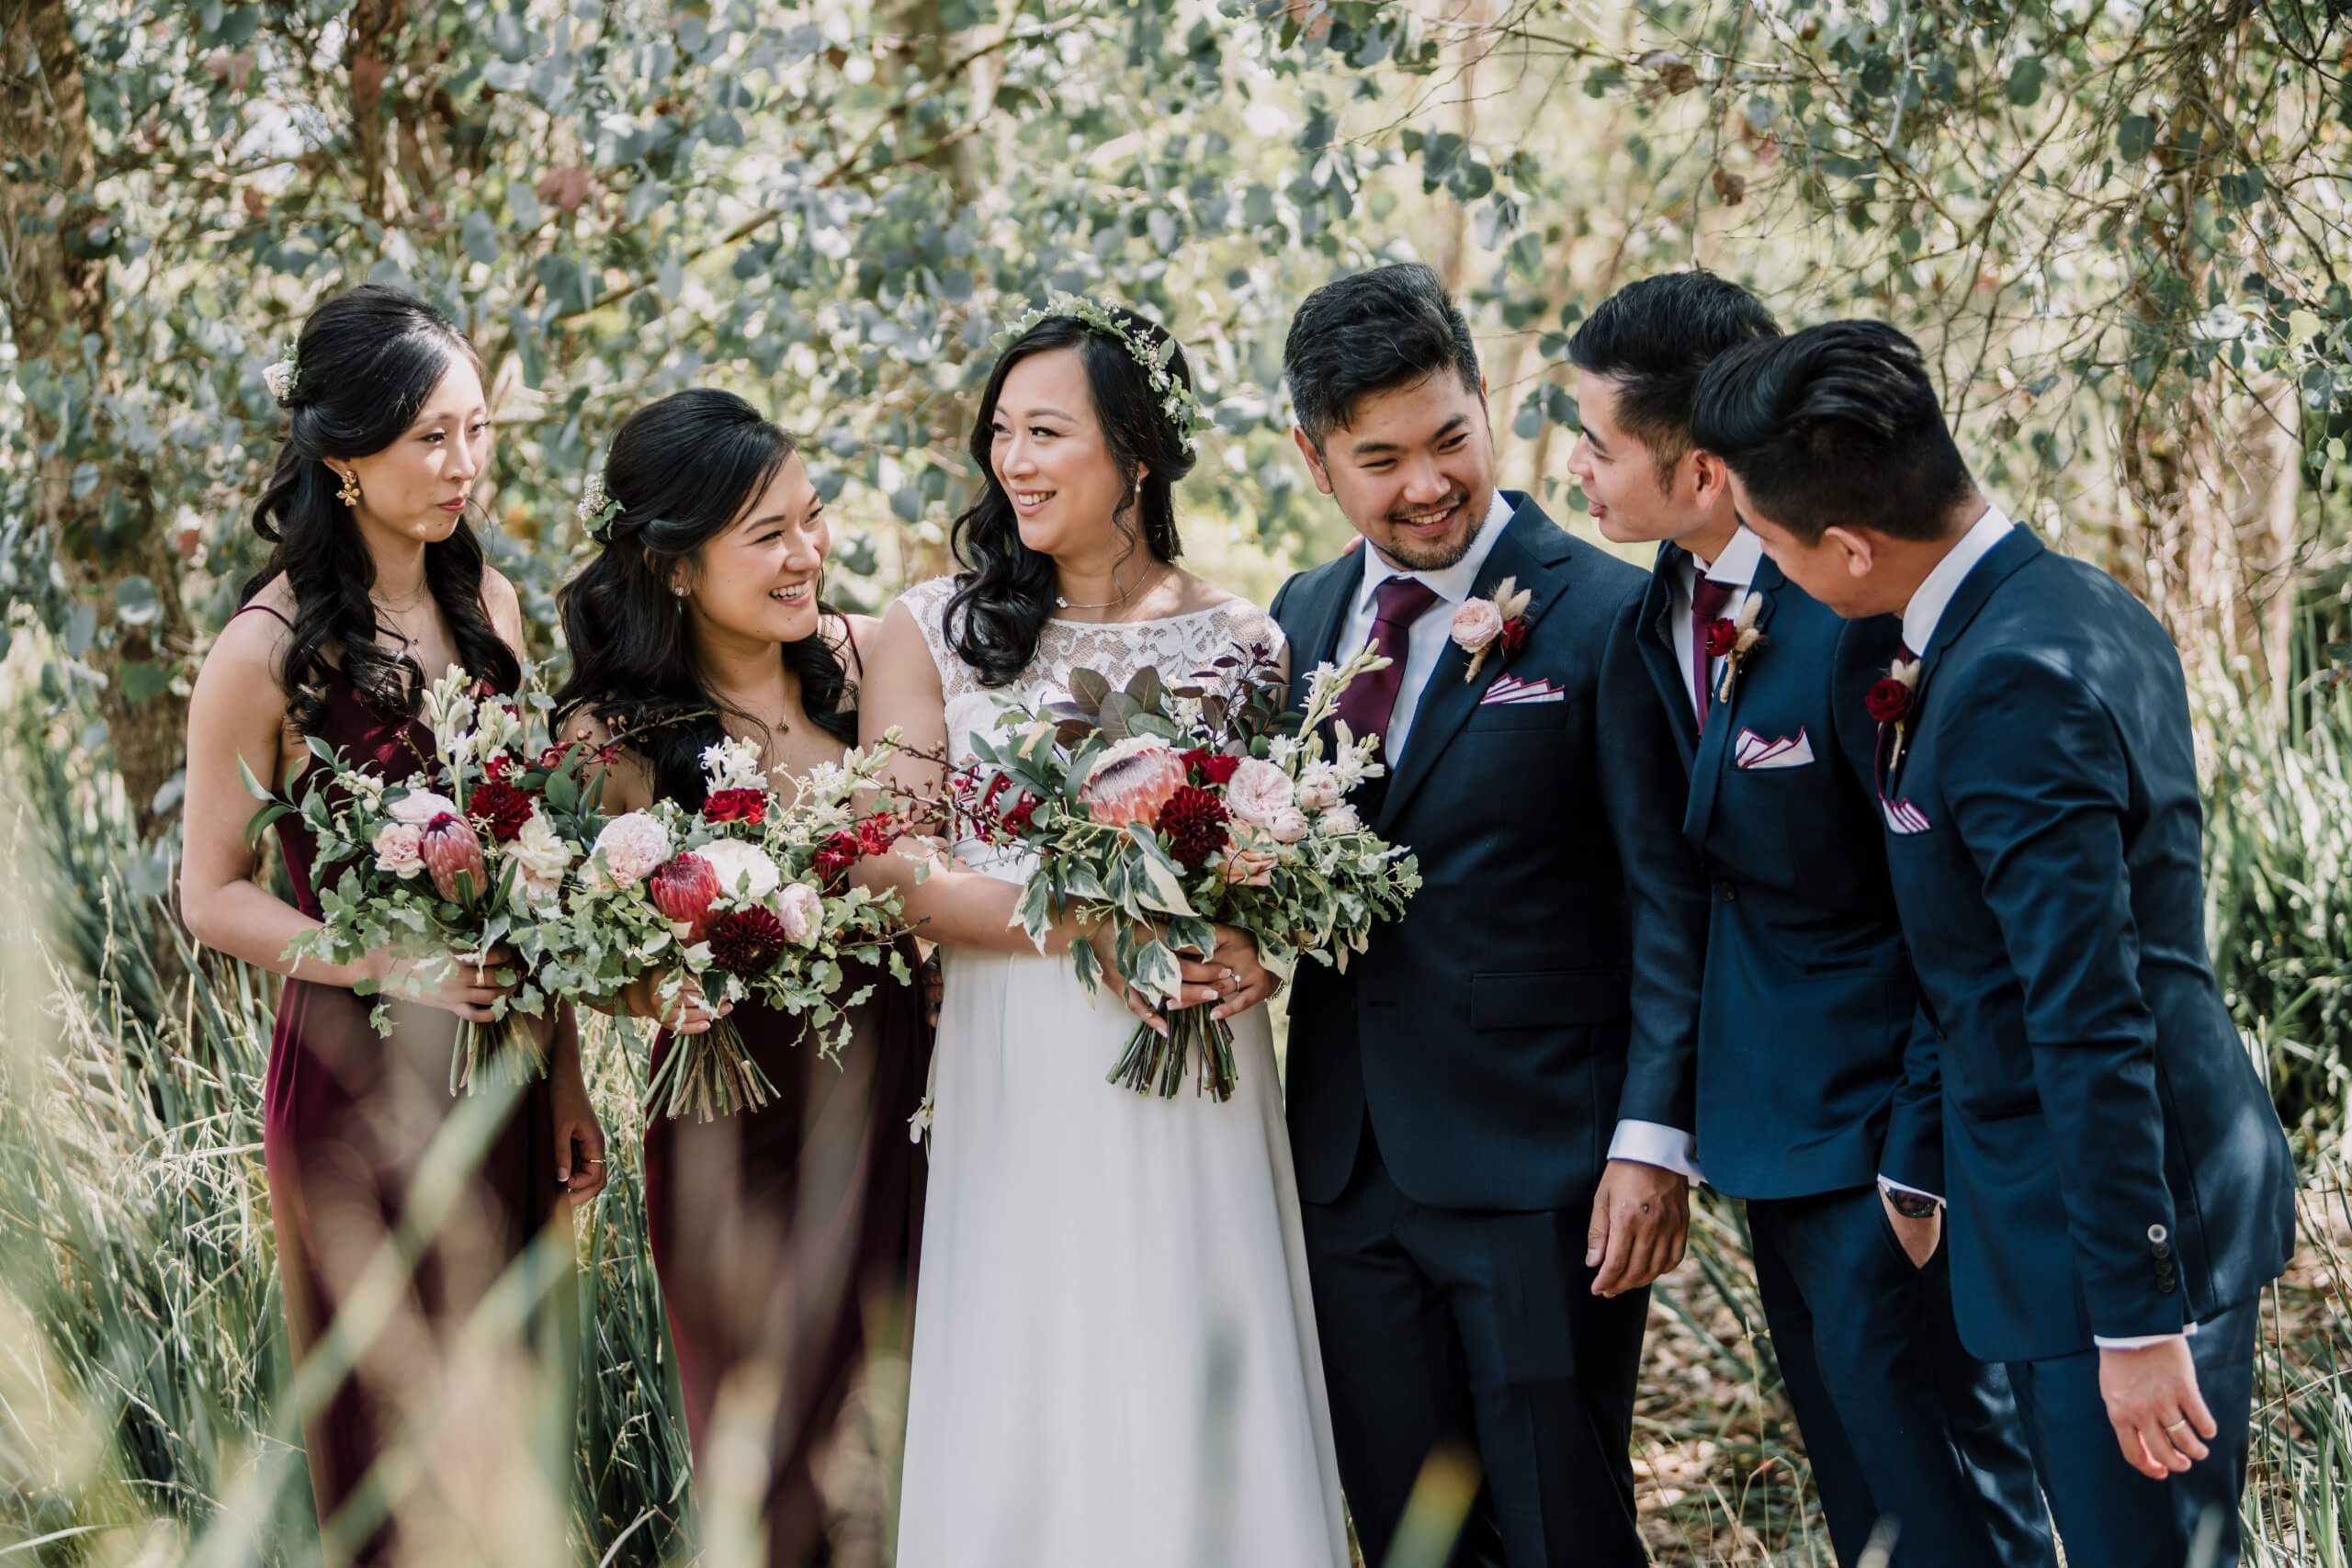 Closeup and Candid shot of the Bridal Party while they are standing in the middle of a garden